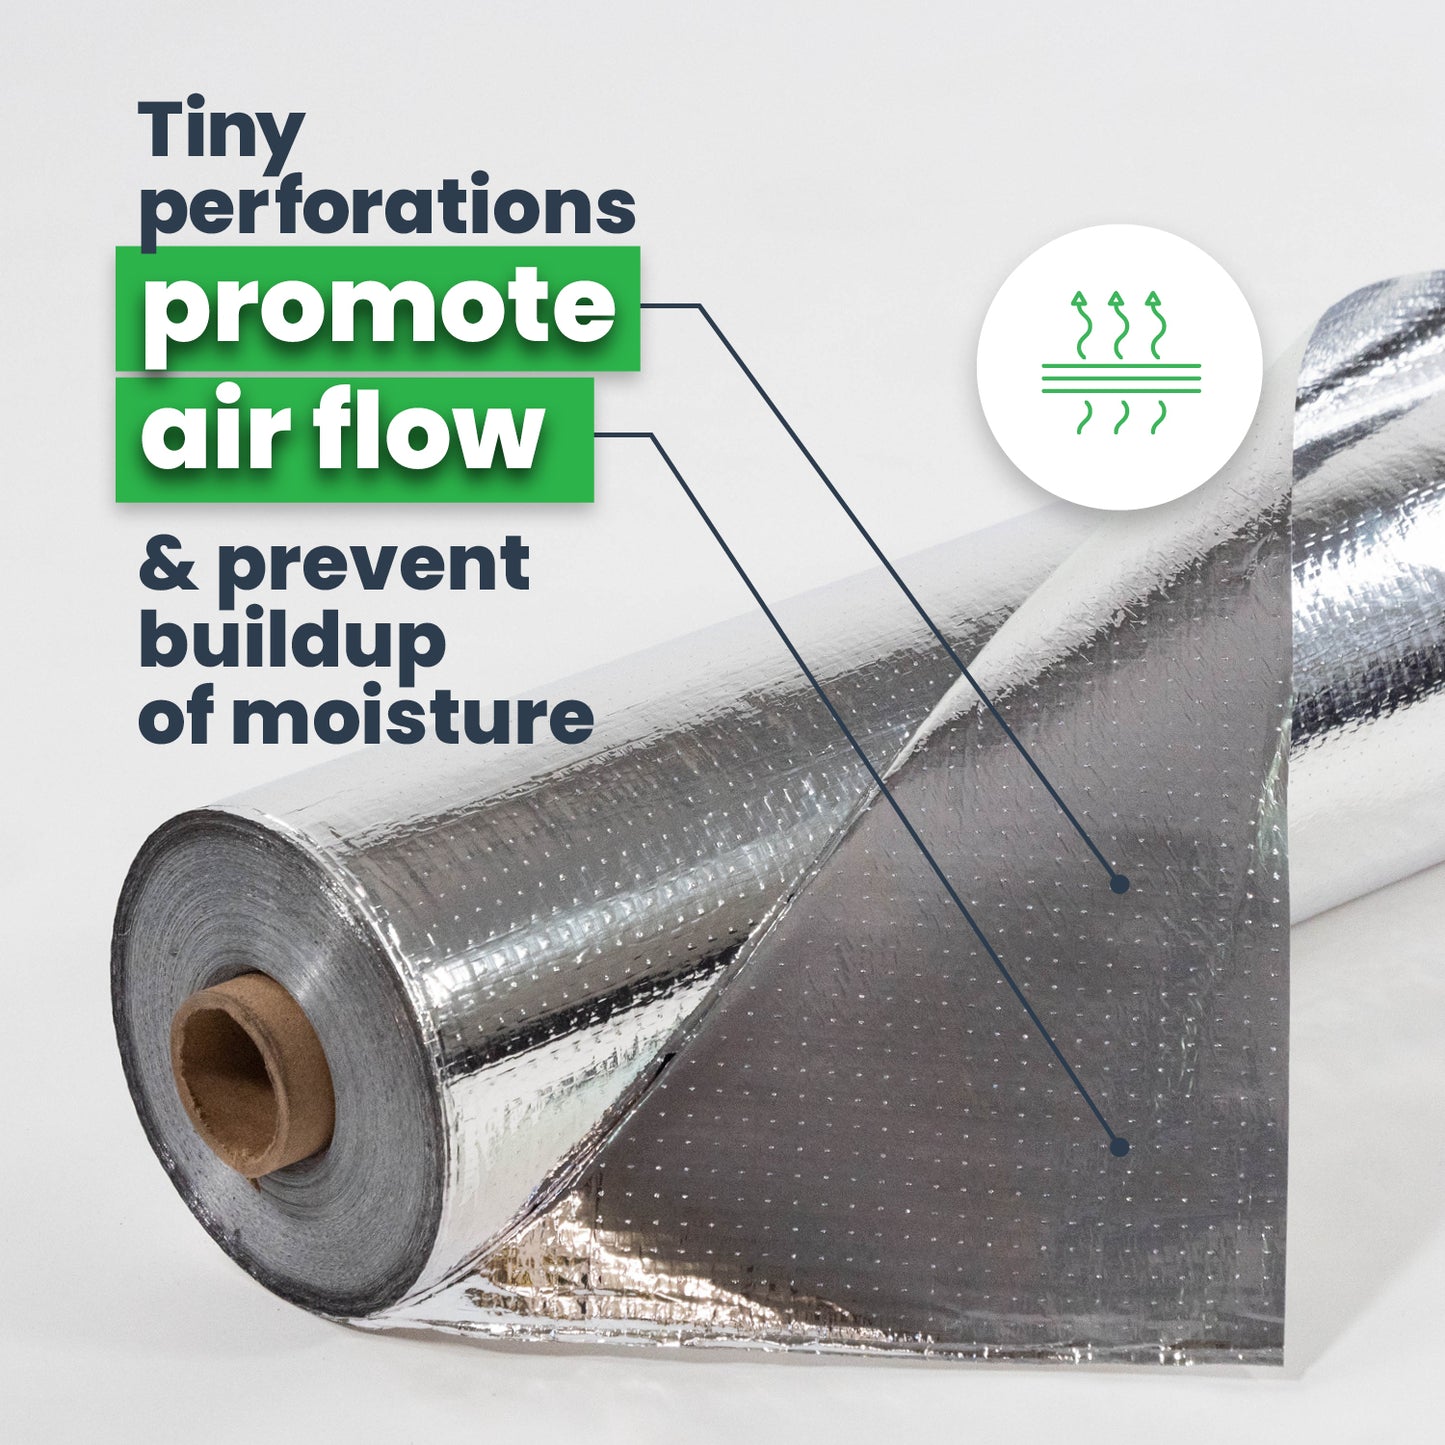 Tiny perforations promote air flow, preventing buildup of moisture and mold